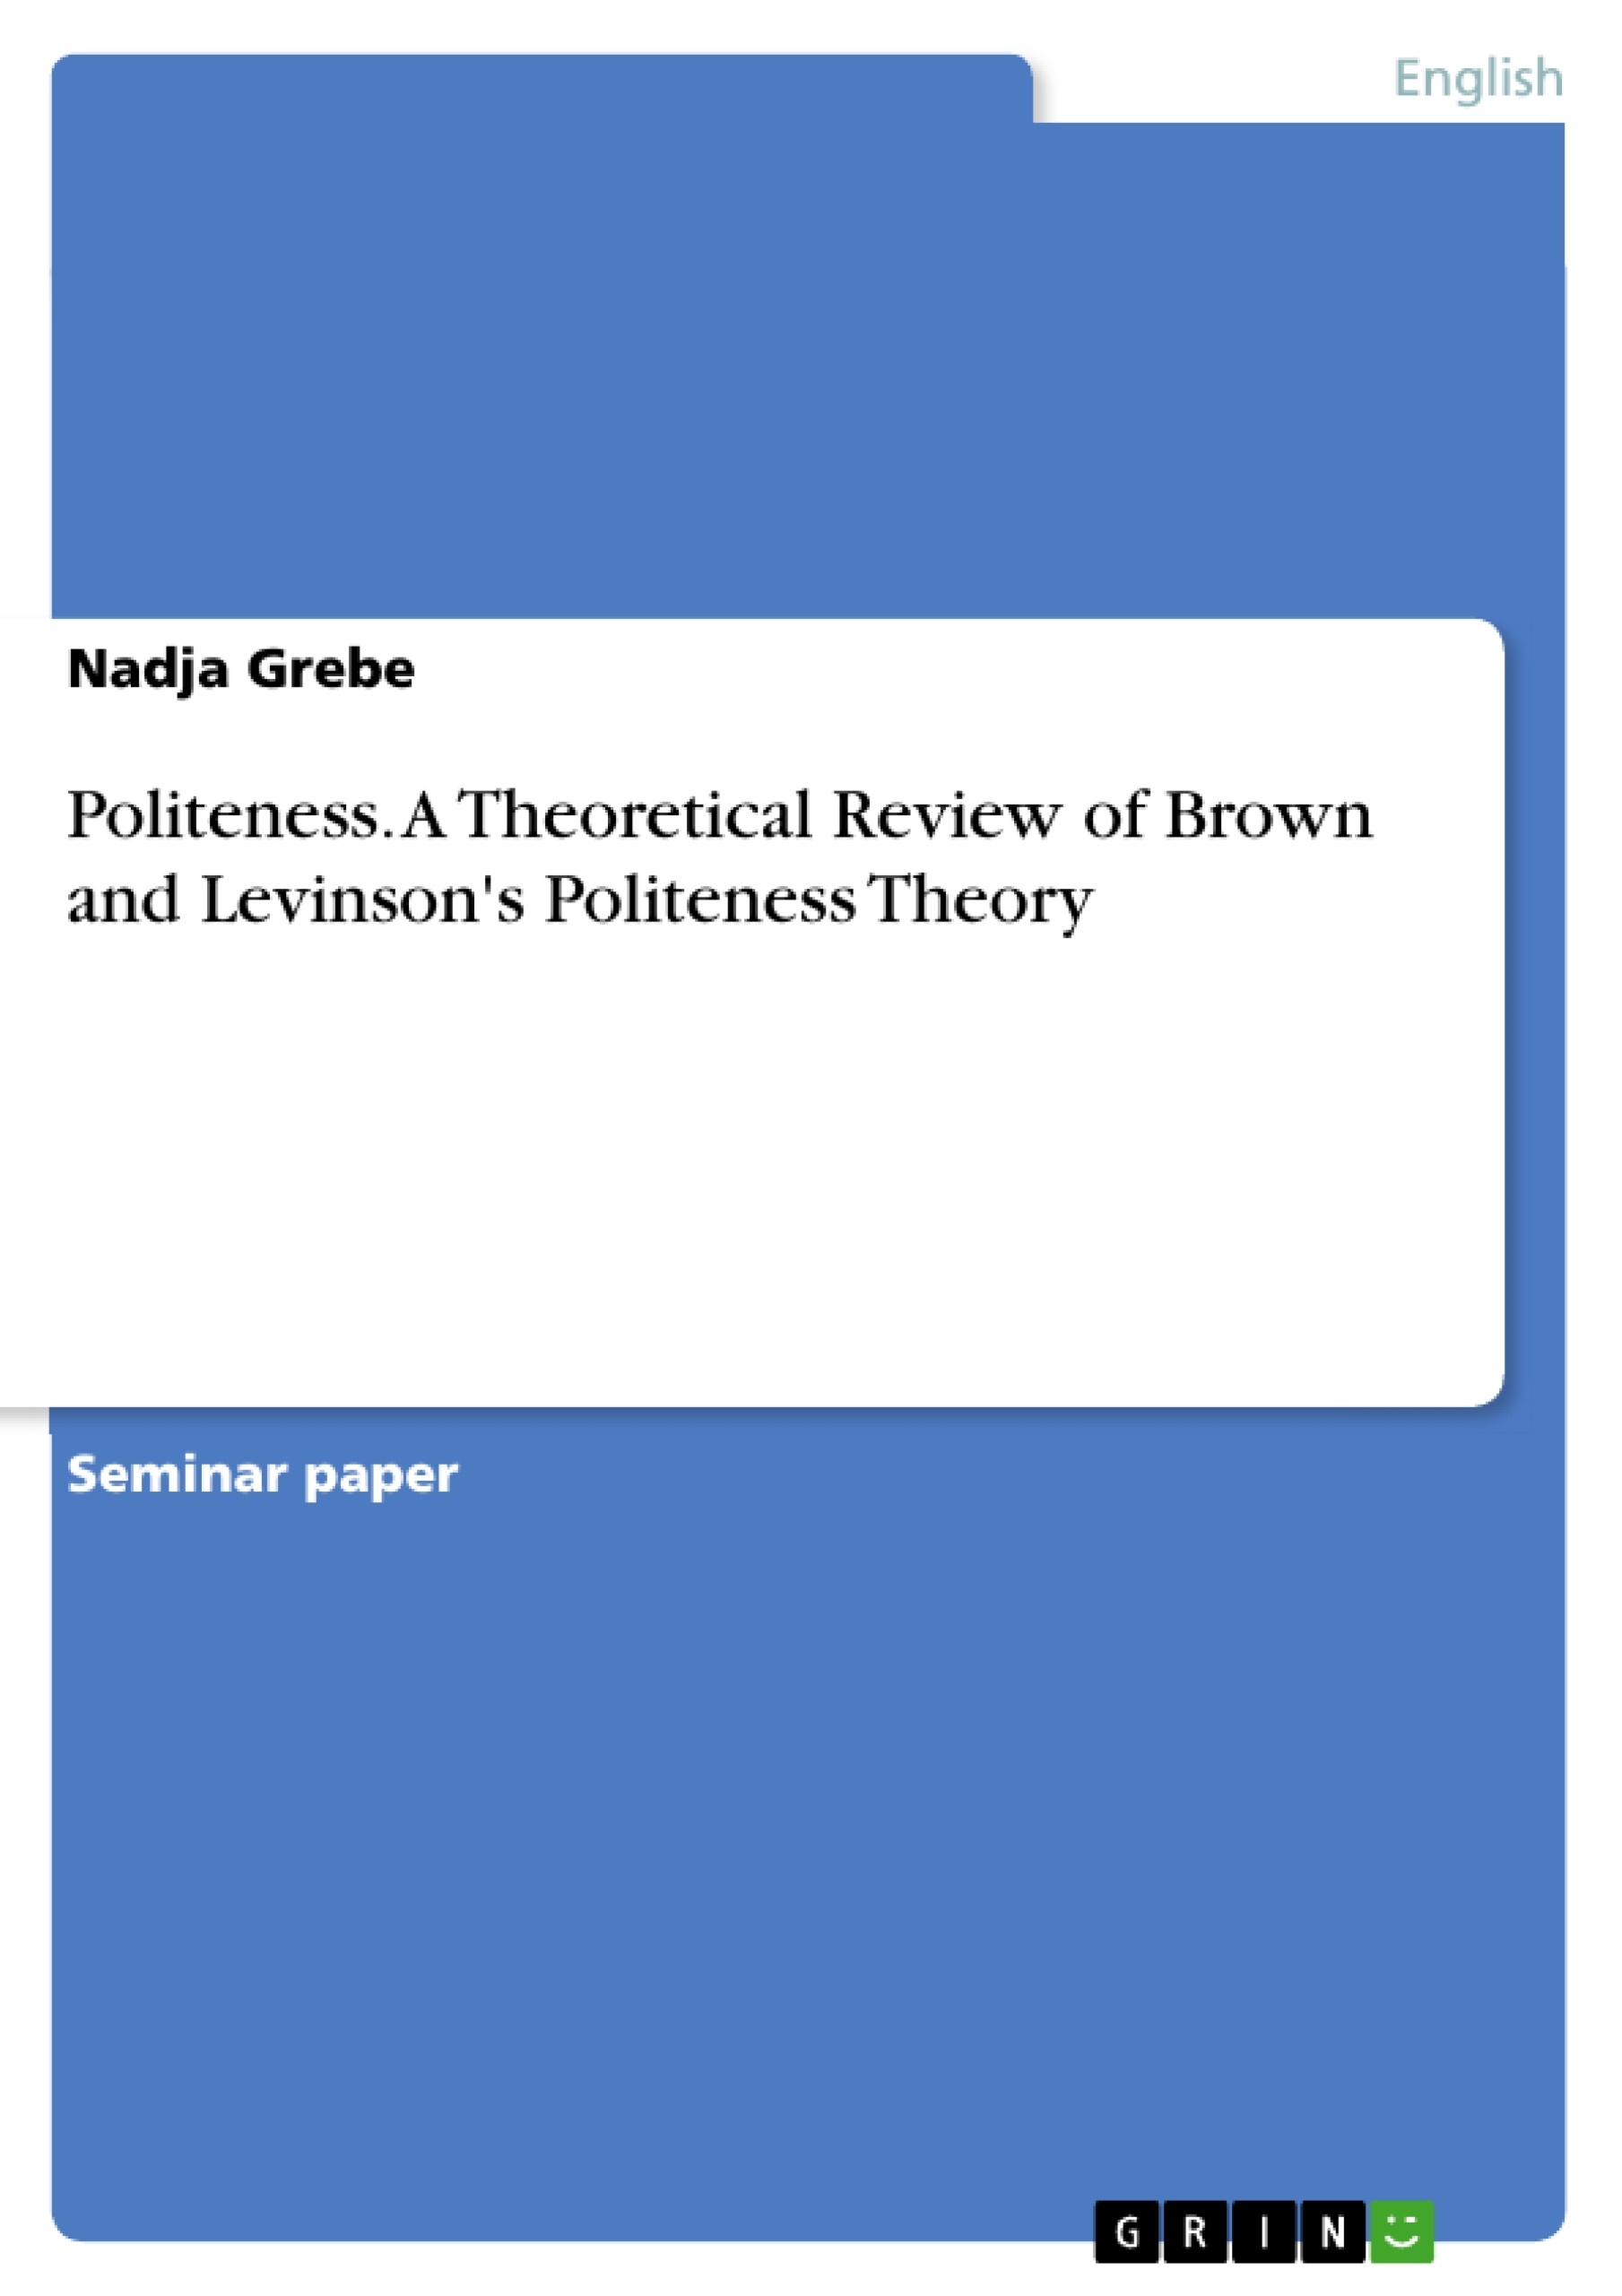 Título: Politeness. A Theoretical Review of Brown and Levinson's Politeness Theory